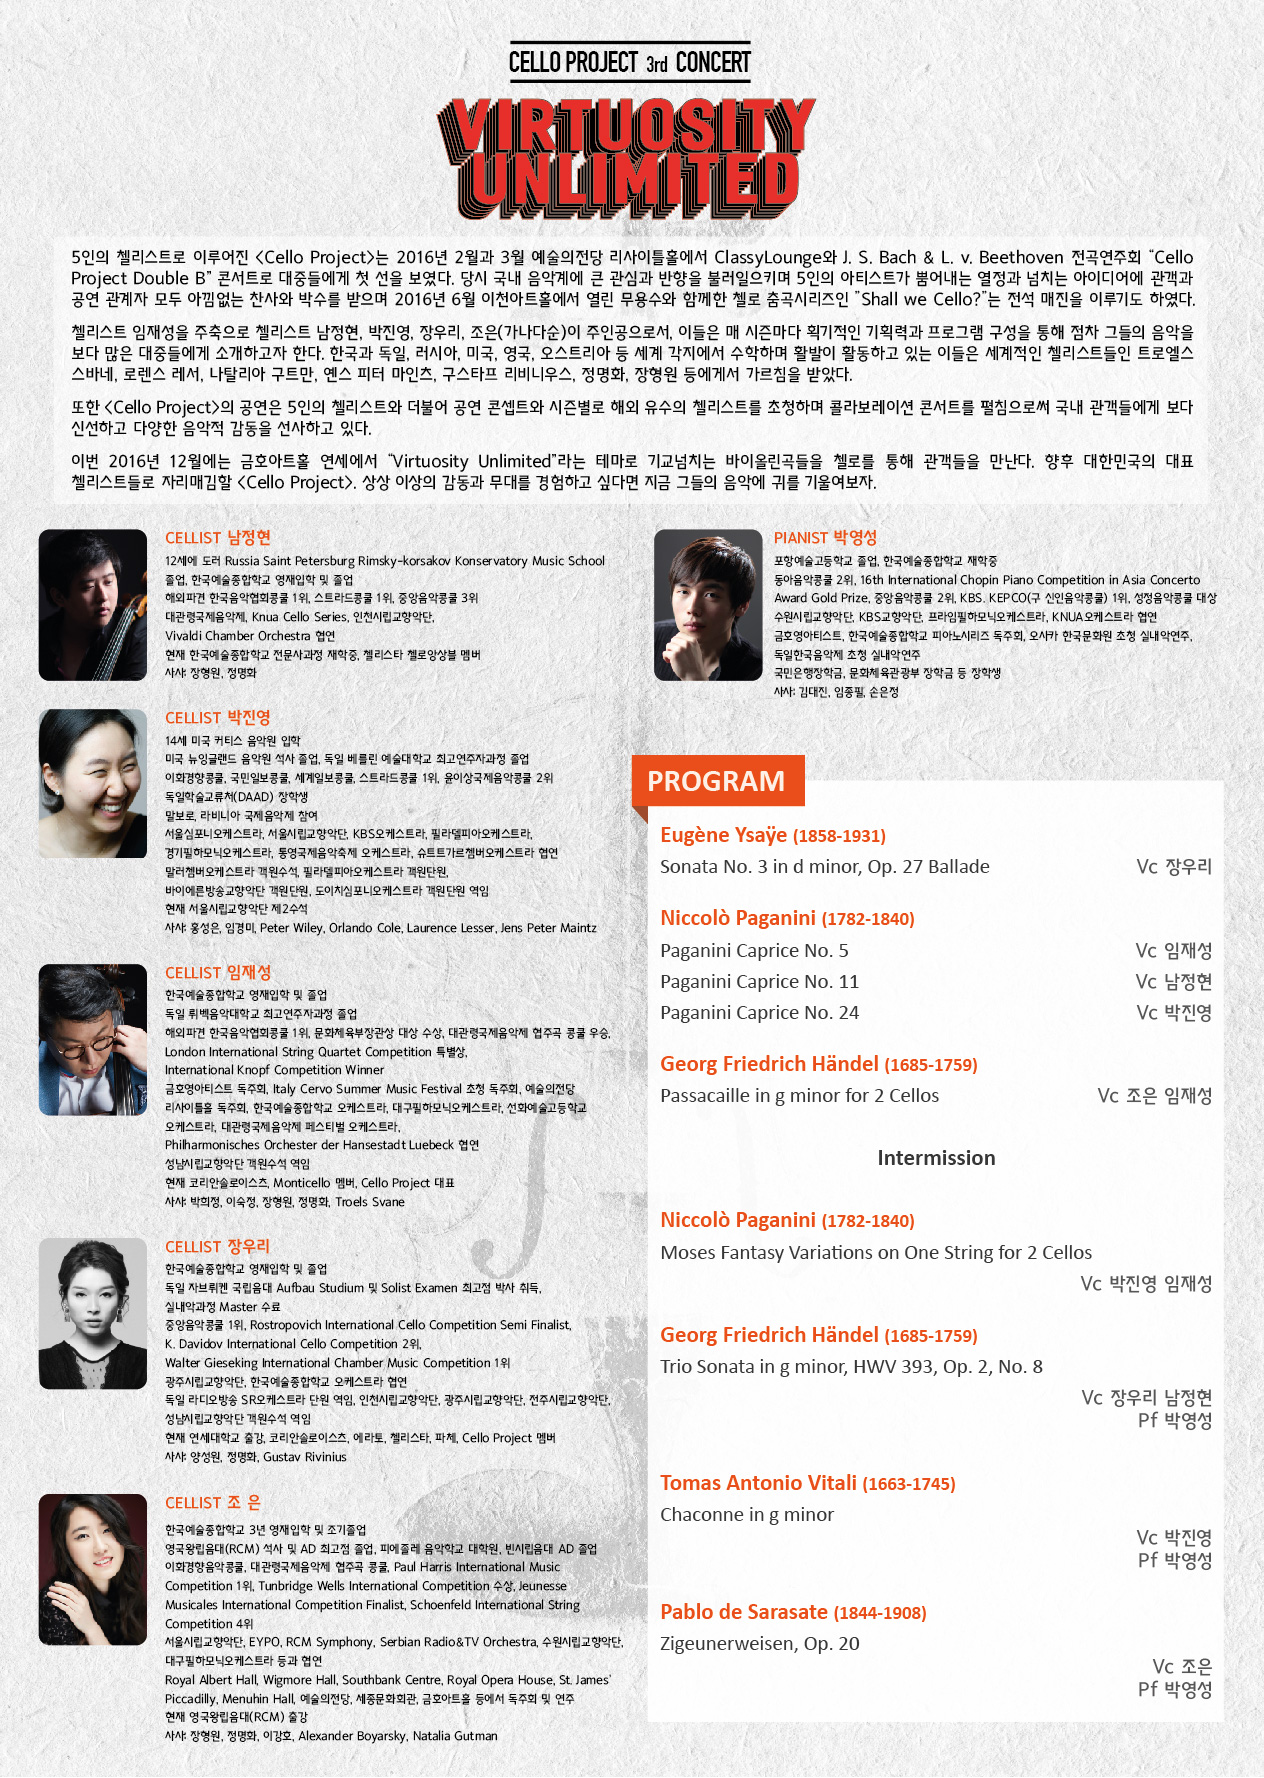 [12.17] Cello Project 3rd Concert - Virtuosity Unlimited 이미지